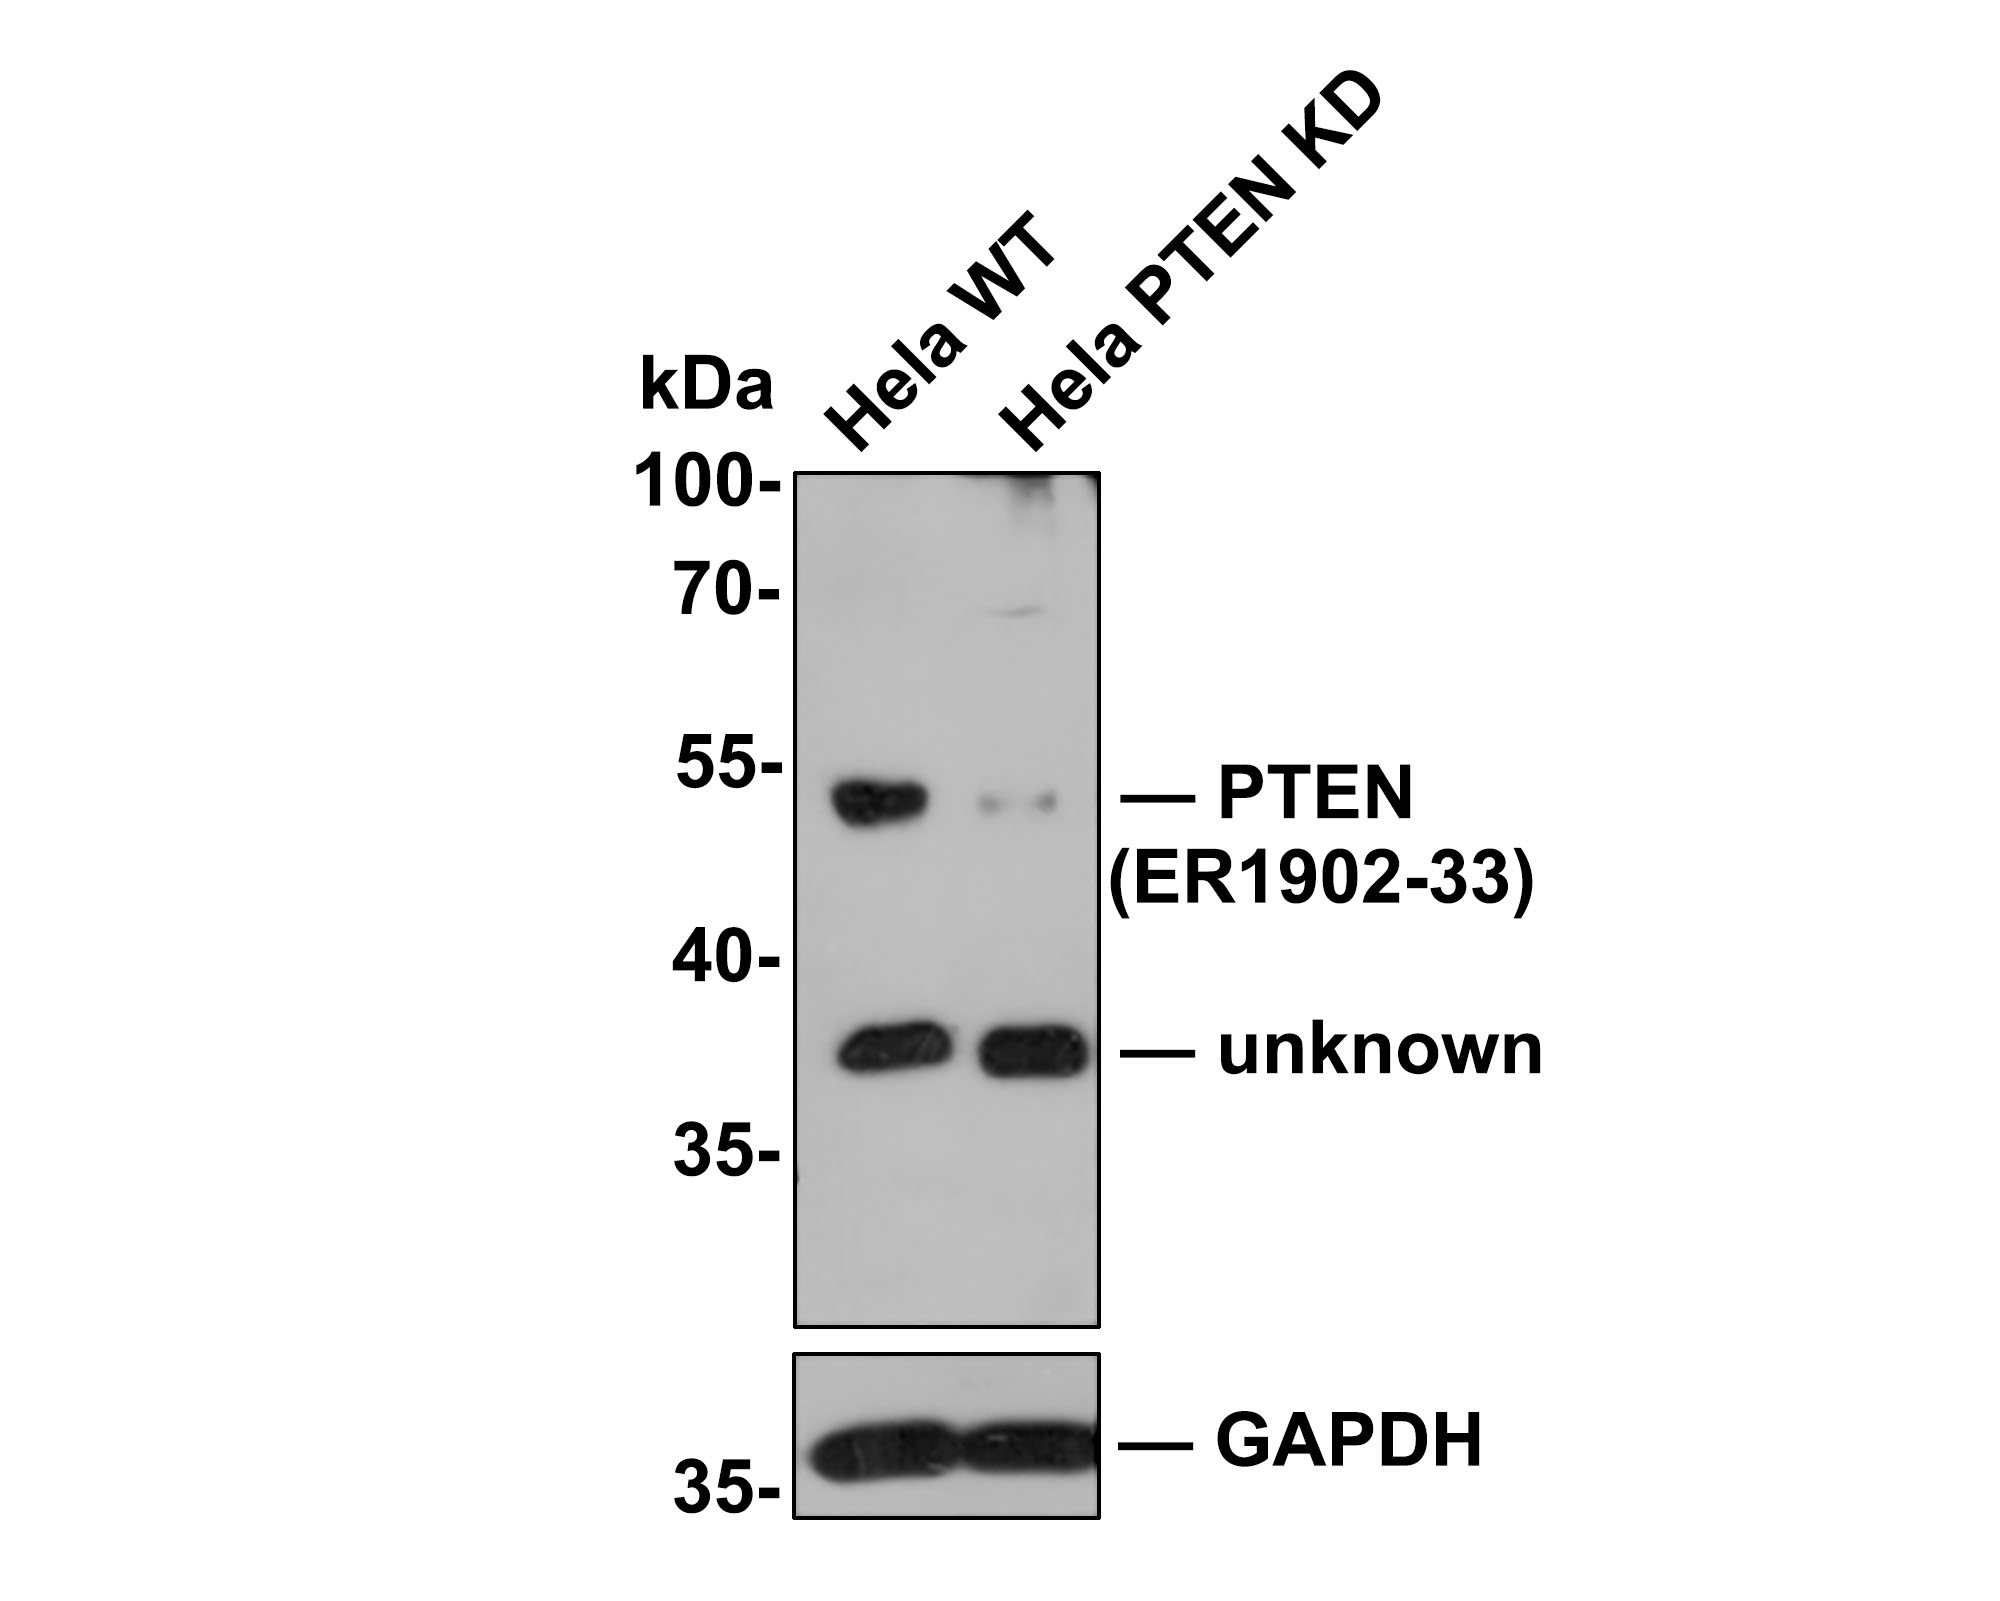 All lanes: Western blot analysis of PTEN with anti-PTEN antibody (ER1902-33) at 1:500 dilution.<br />
Lane 1: Wild-type Hela whole cell lysate (10 µg).<br />
Lane 2: PTEN knockdown Hela whole cell lysate (10 µg).<br />
<br />
ER1902-33 was shown to specifically react with PTEN in wild-type Hela cells. Weakened band was observed when PTEN knockdown sample was tested. Wild-type and PTEN knockdown samples were subjected to SDS-PAGE. Proteins were transferred to a PVDF membrane and blocked with 5% NFDM in TBST for 1 hour at room temperature. The primary antibody (ER1902-33, 1:500) was used in 5% BSA at room temperature for 2 hours. Goat Anti-Rabbit IgG-HRP Secondary Antibody (HA1001) at 1:300,000 dilution was used for 1 hour at room temperature.